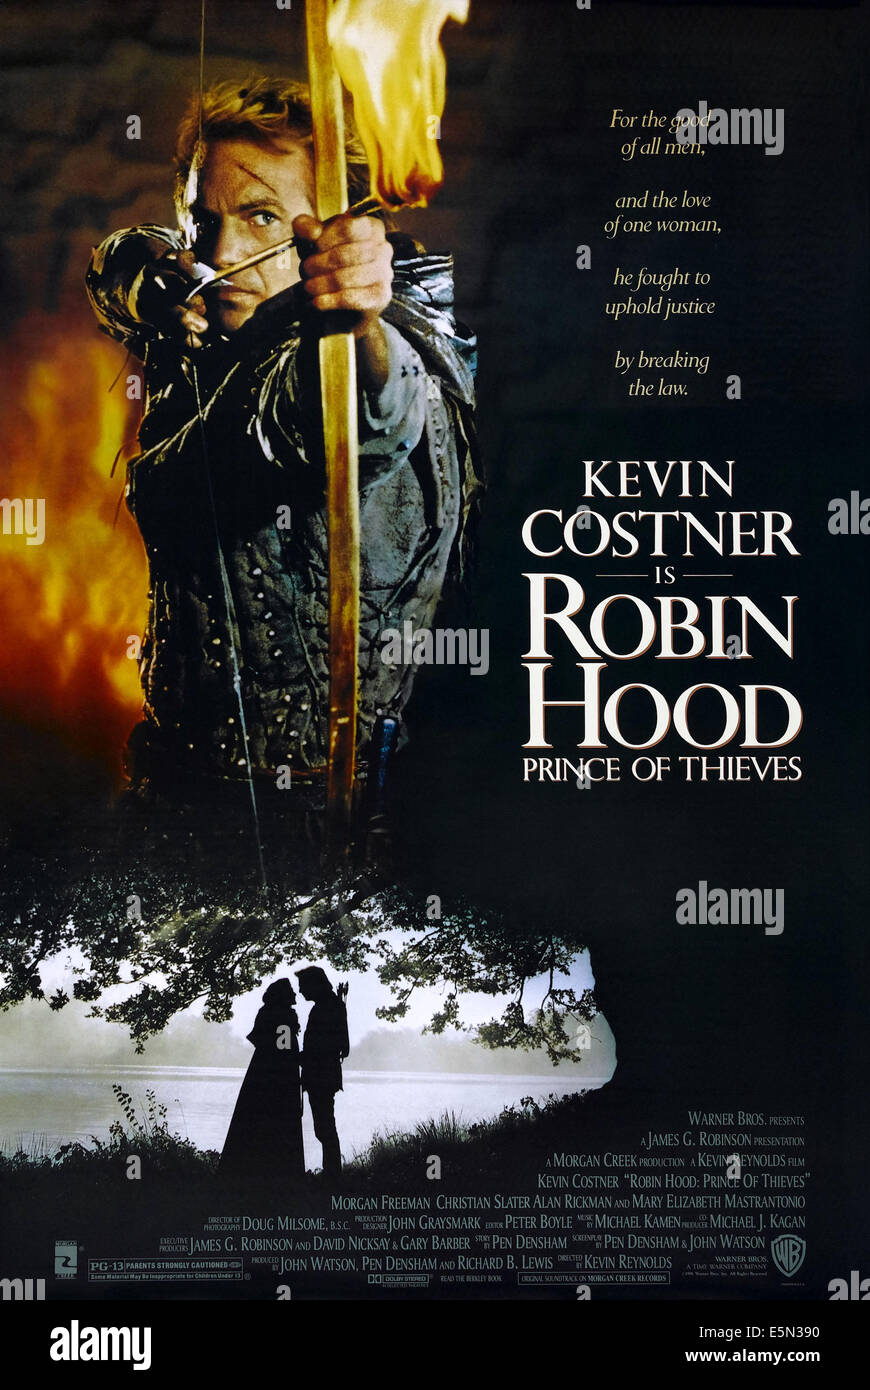 ROBIN HOOD: PRINCE OF THIEVES, Kevin Costner, 1991, ©Warner Bros./courtesy Everett Collection Stock Photo